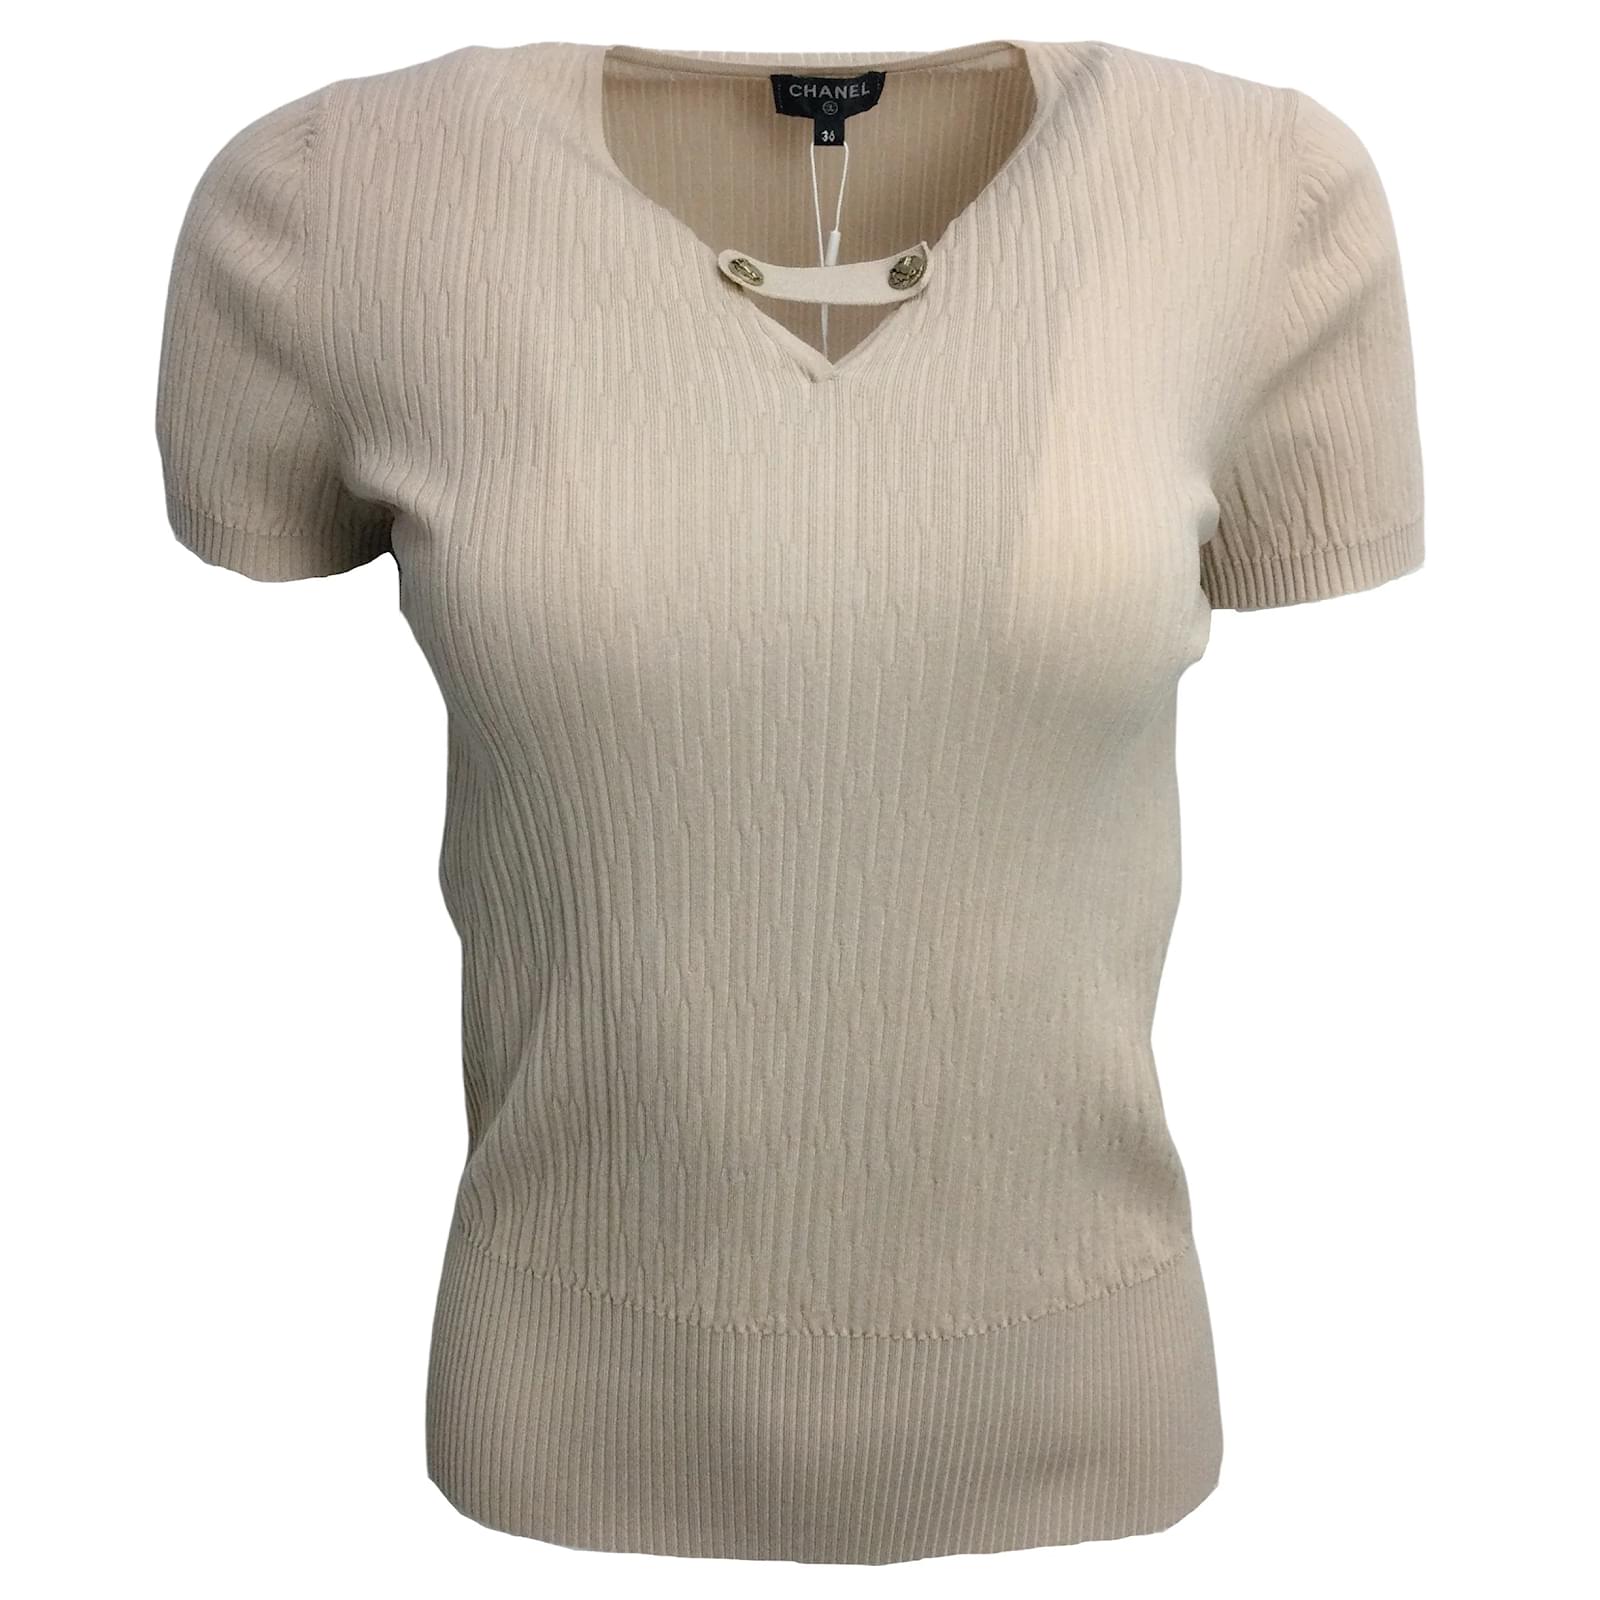 Knitwear Chanel Chanel Tan Short Sleeved Knit Top Size S Inter